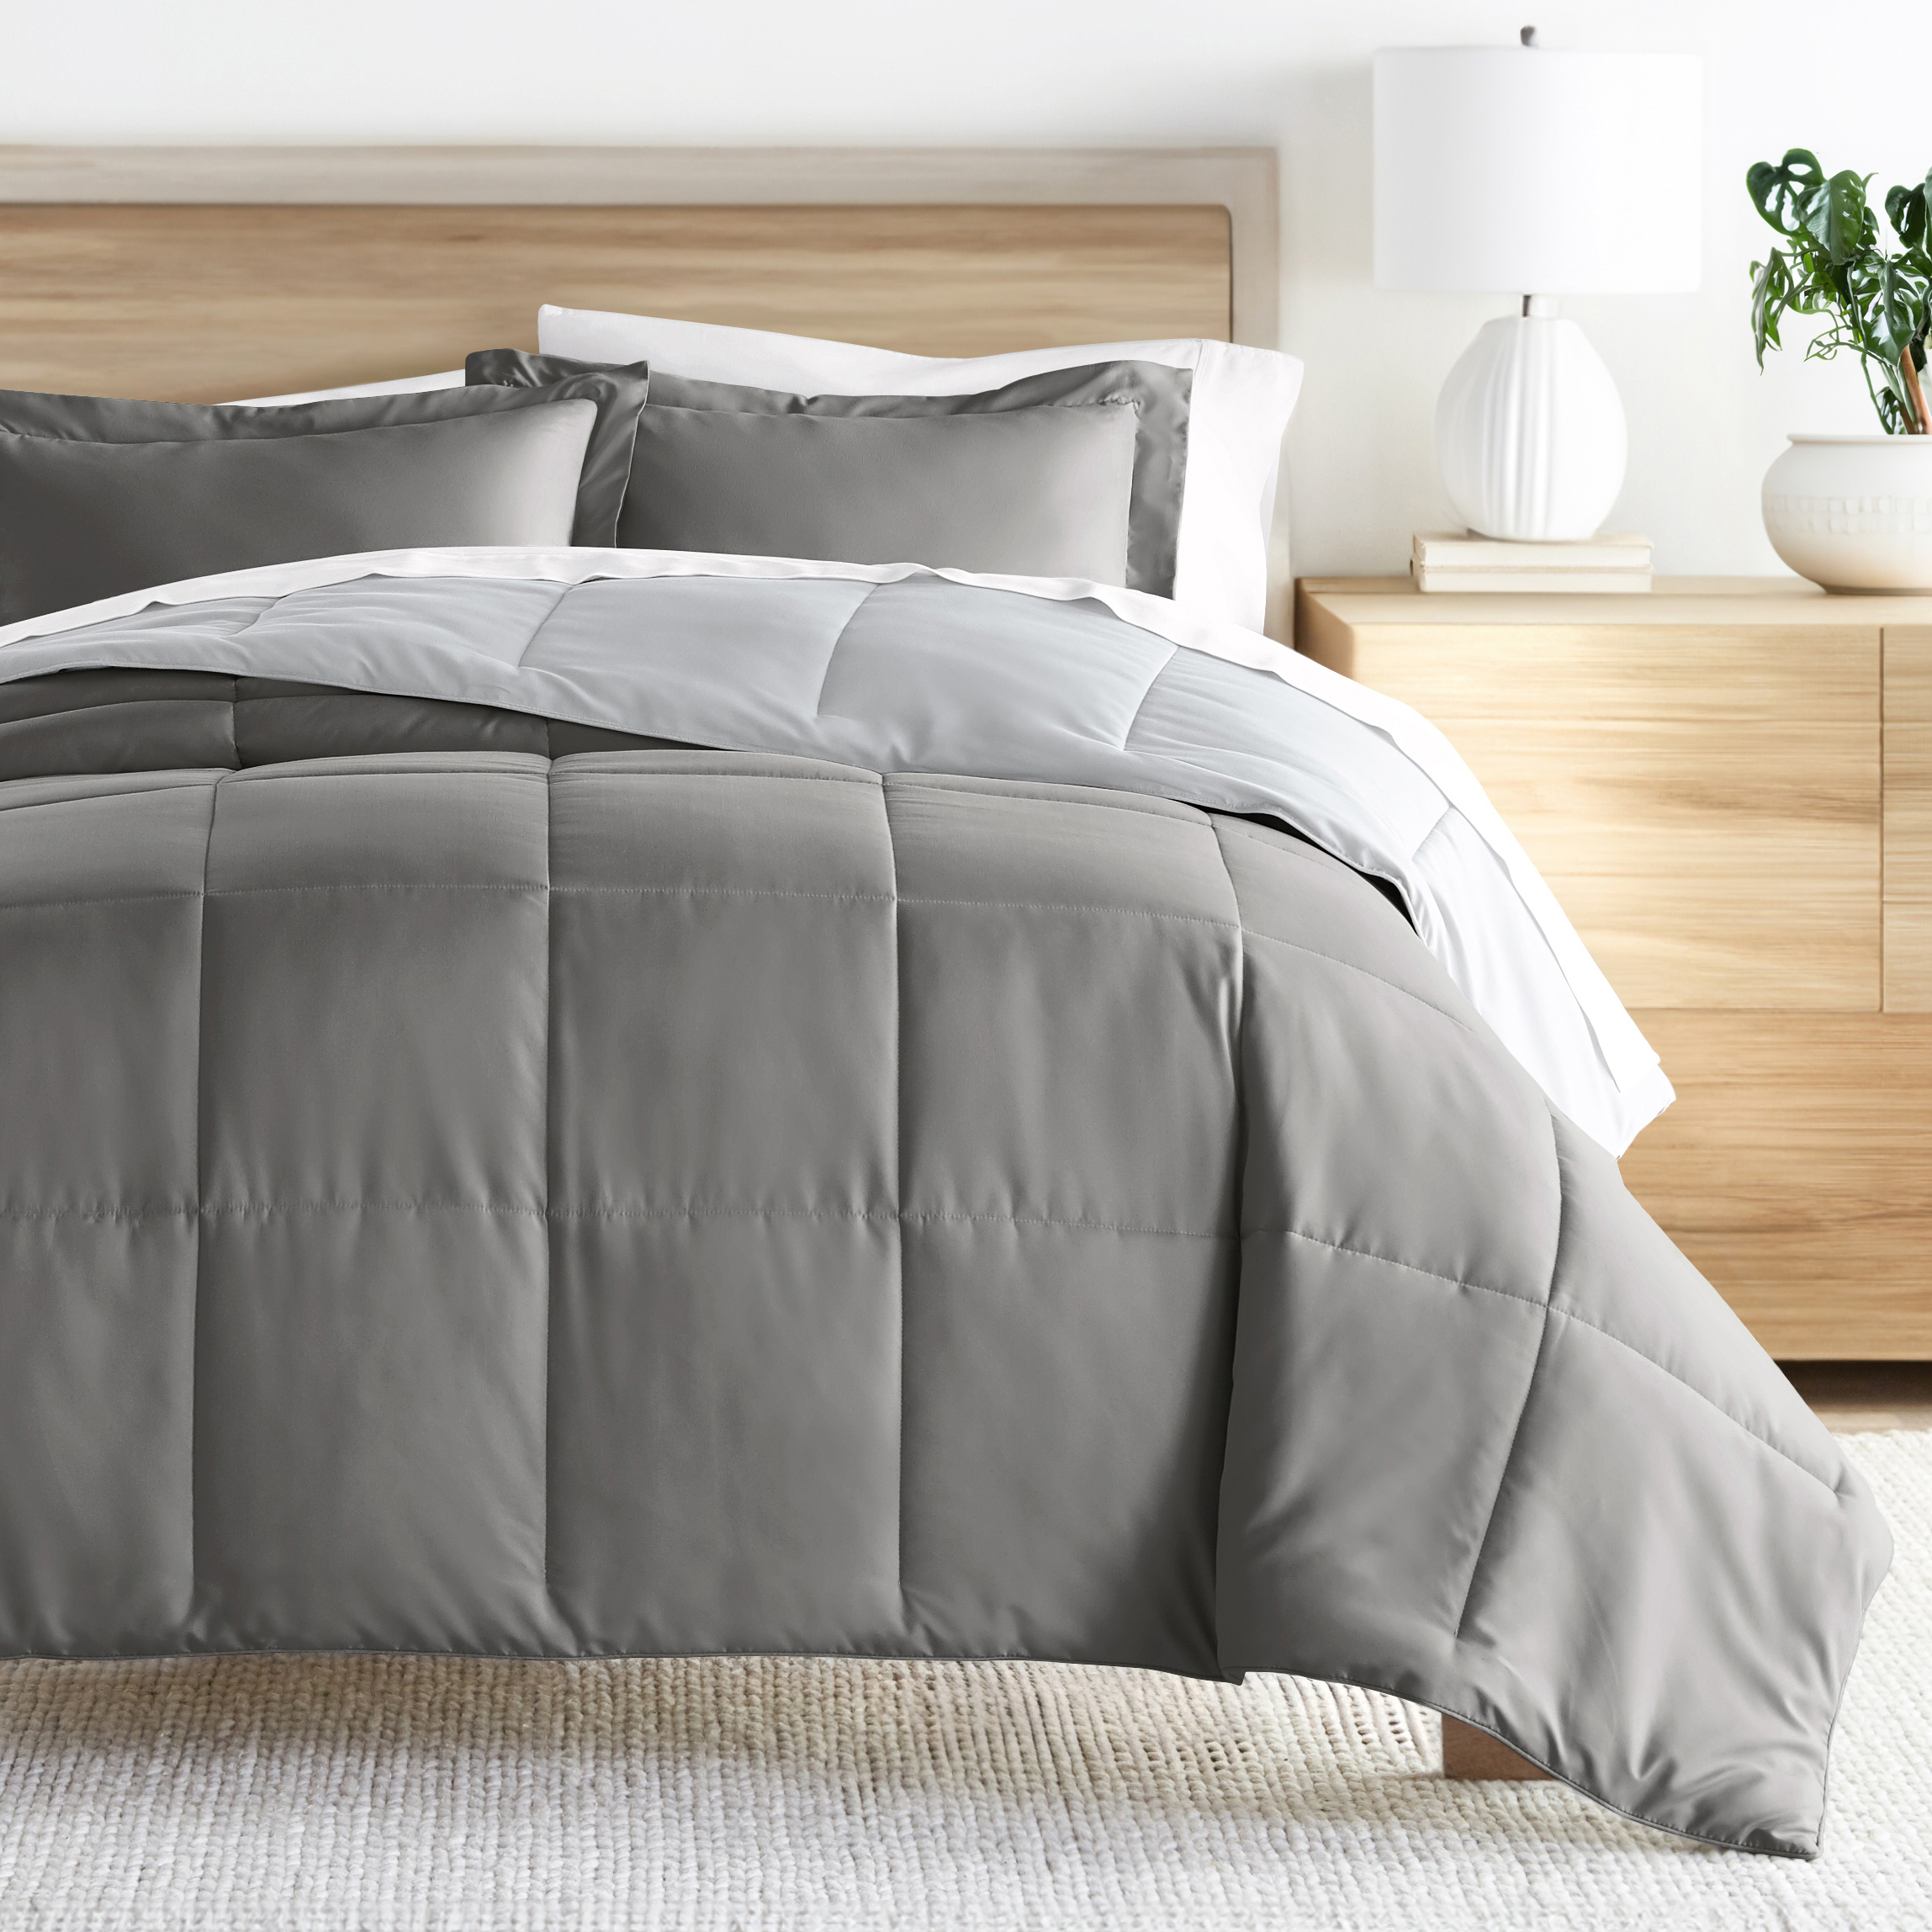 Noble Linens 3-Piece Gray & Silver Reversible Down Alternative Comforter Set, Full/Queen - image 5 of 9